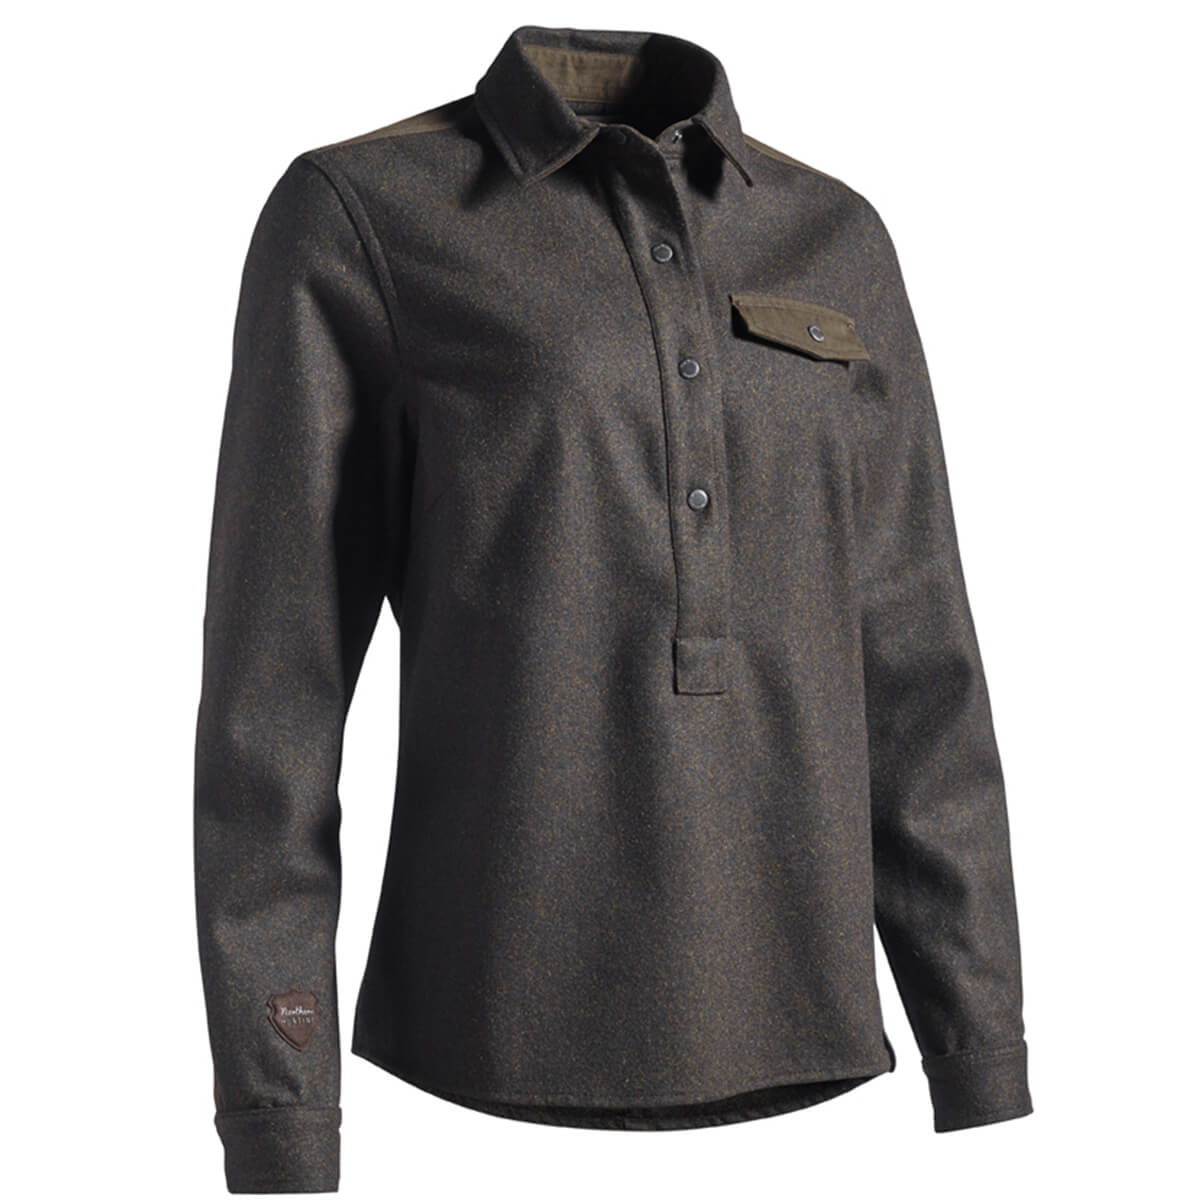  Northern Hunting Loden overhemd Roskva - Blouses & shirts